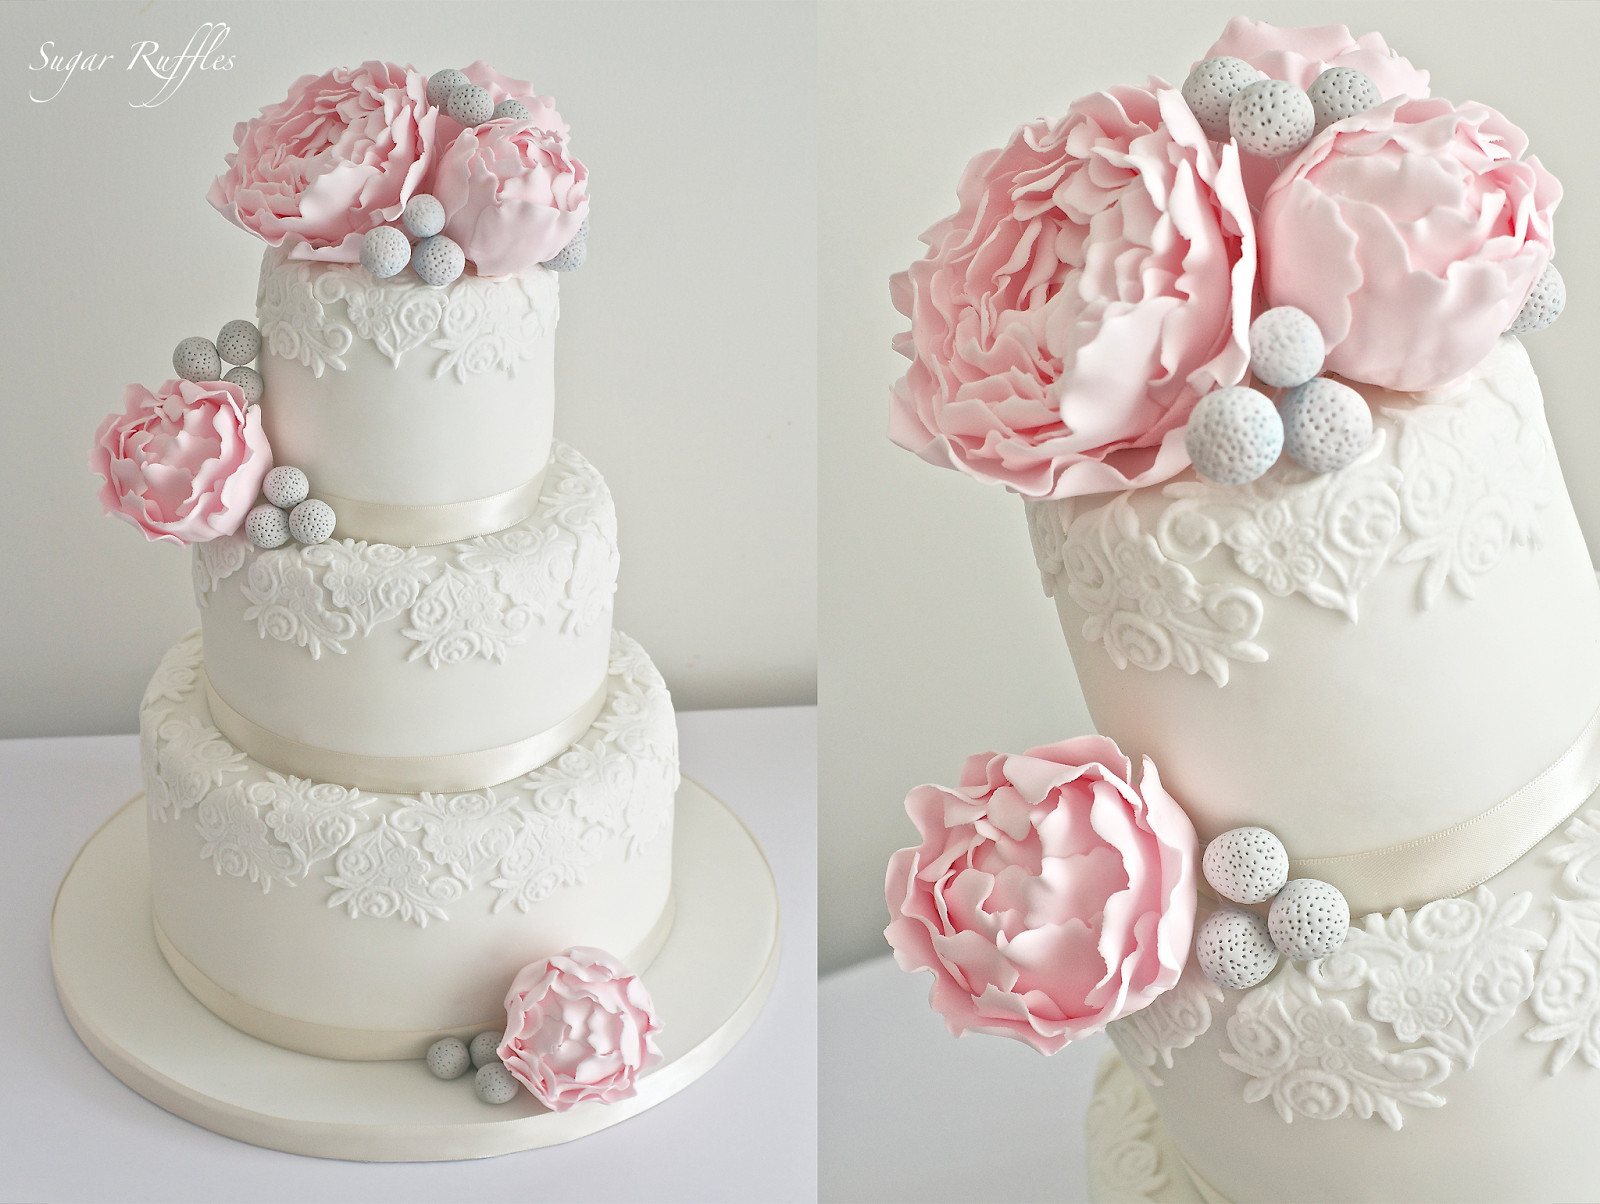 Wedding Cakes With Peonies
 Teacups sugar flowers and pearls